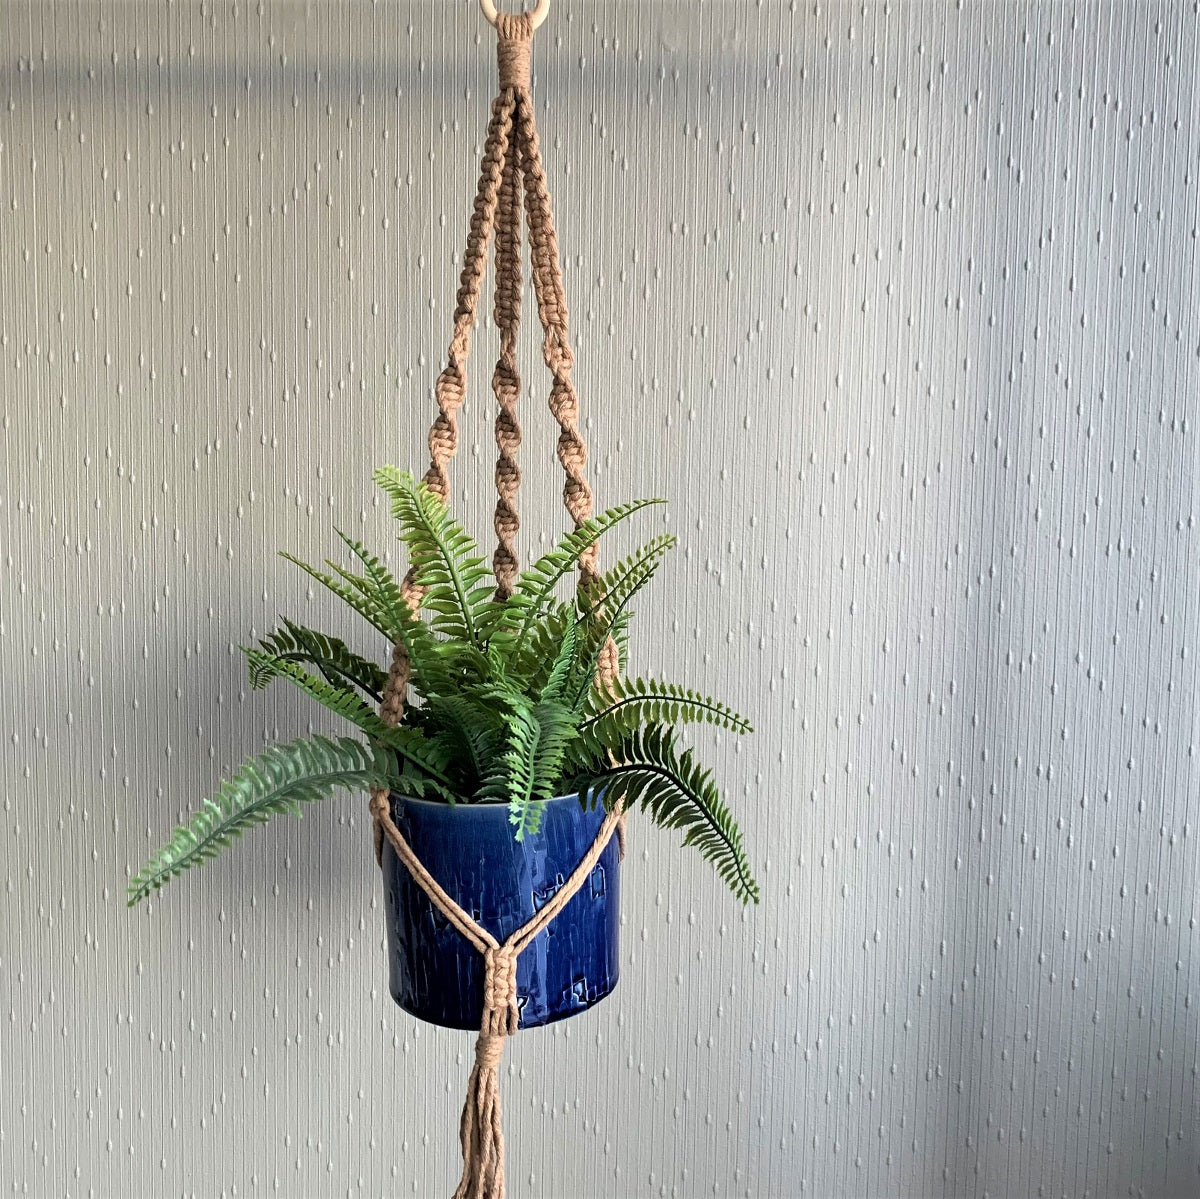 A minimalist brown macrame plant hanger with a fern plant in a blue planter